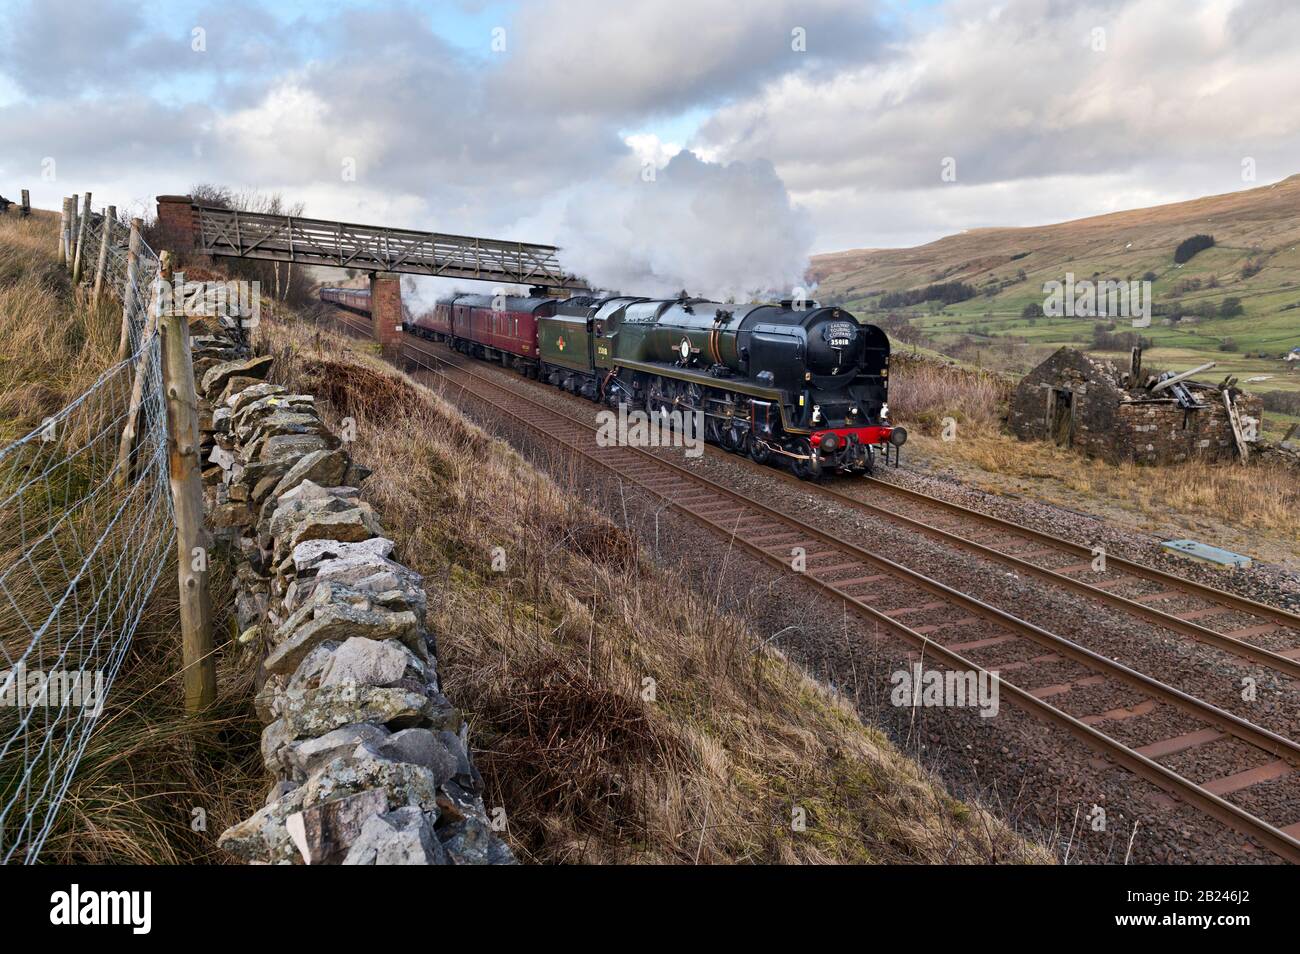 Shoregill near Kirkby Stephen, Cumbria, UK. 29nd February, 2020.The 'Winter Cumbrian Mountain Express' special hauled by steam locomotive 'British India Line'' 35018 seen here steaming south through the Eden Valley in the Yorkshire Dales National Park on famous Settle to Carlisle railway line. Credit: John Bentley/Alamy Live News. Stock Photo